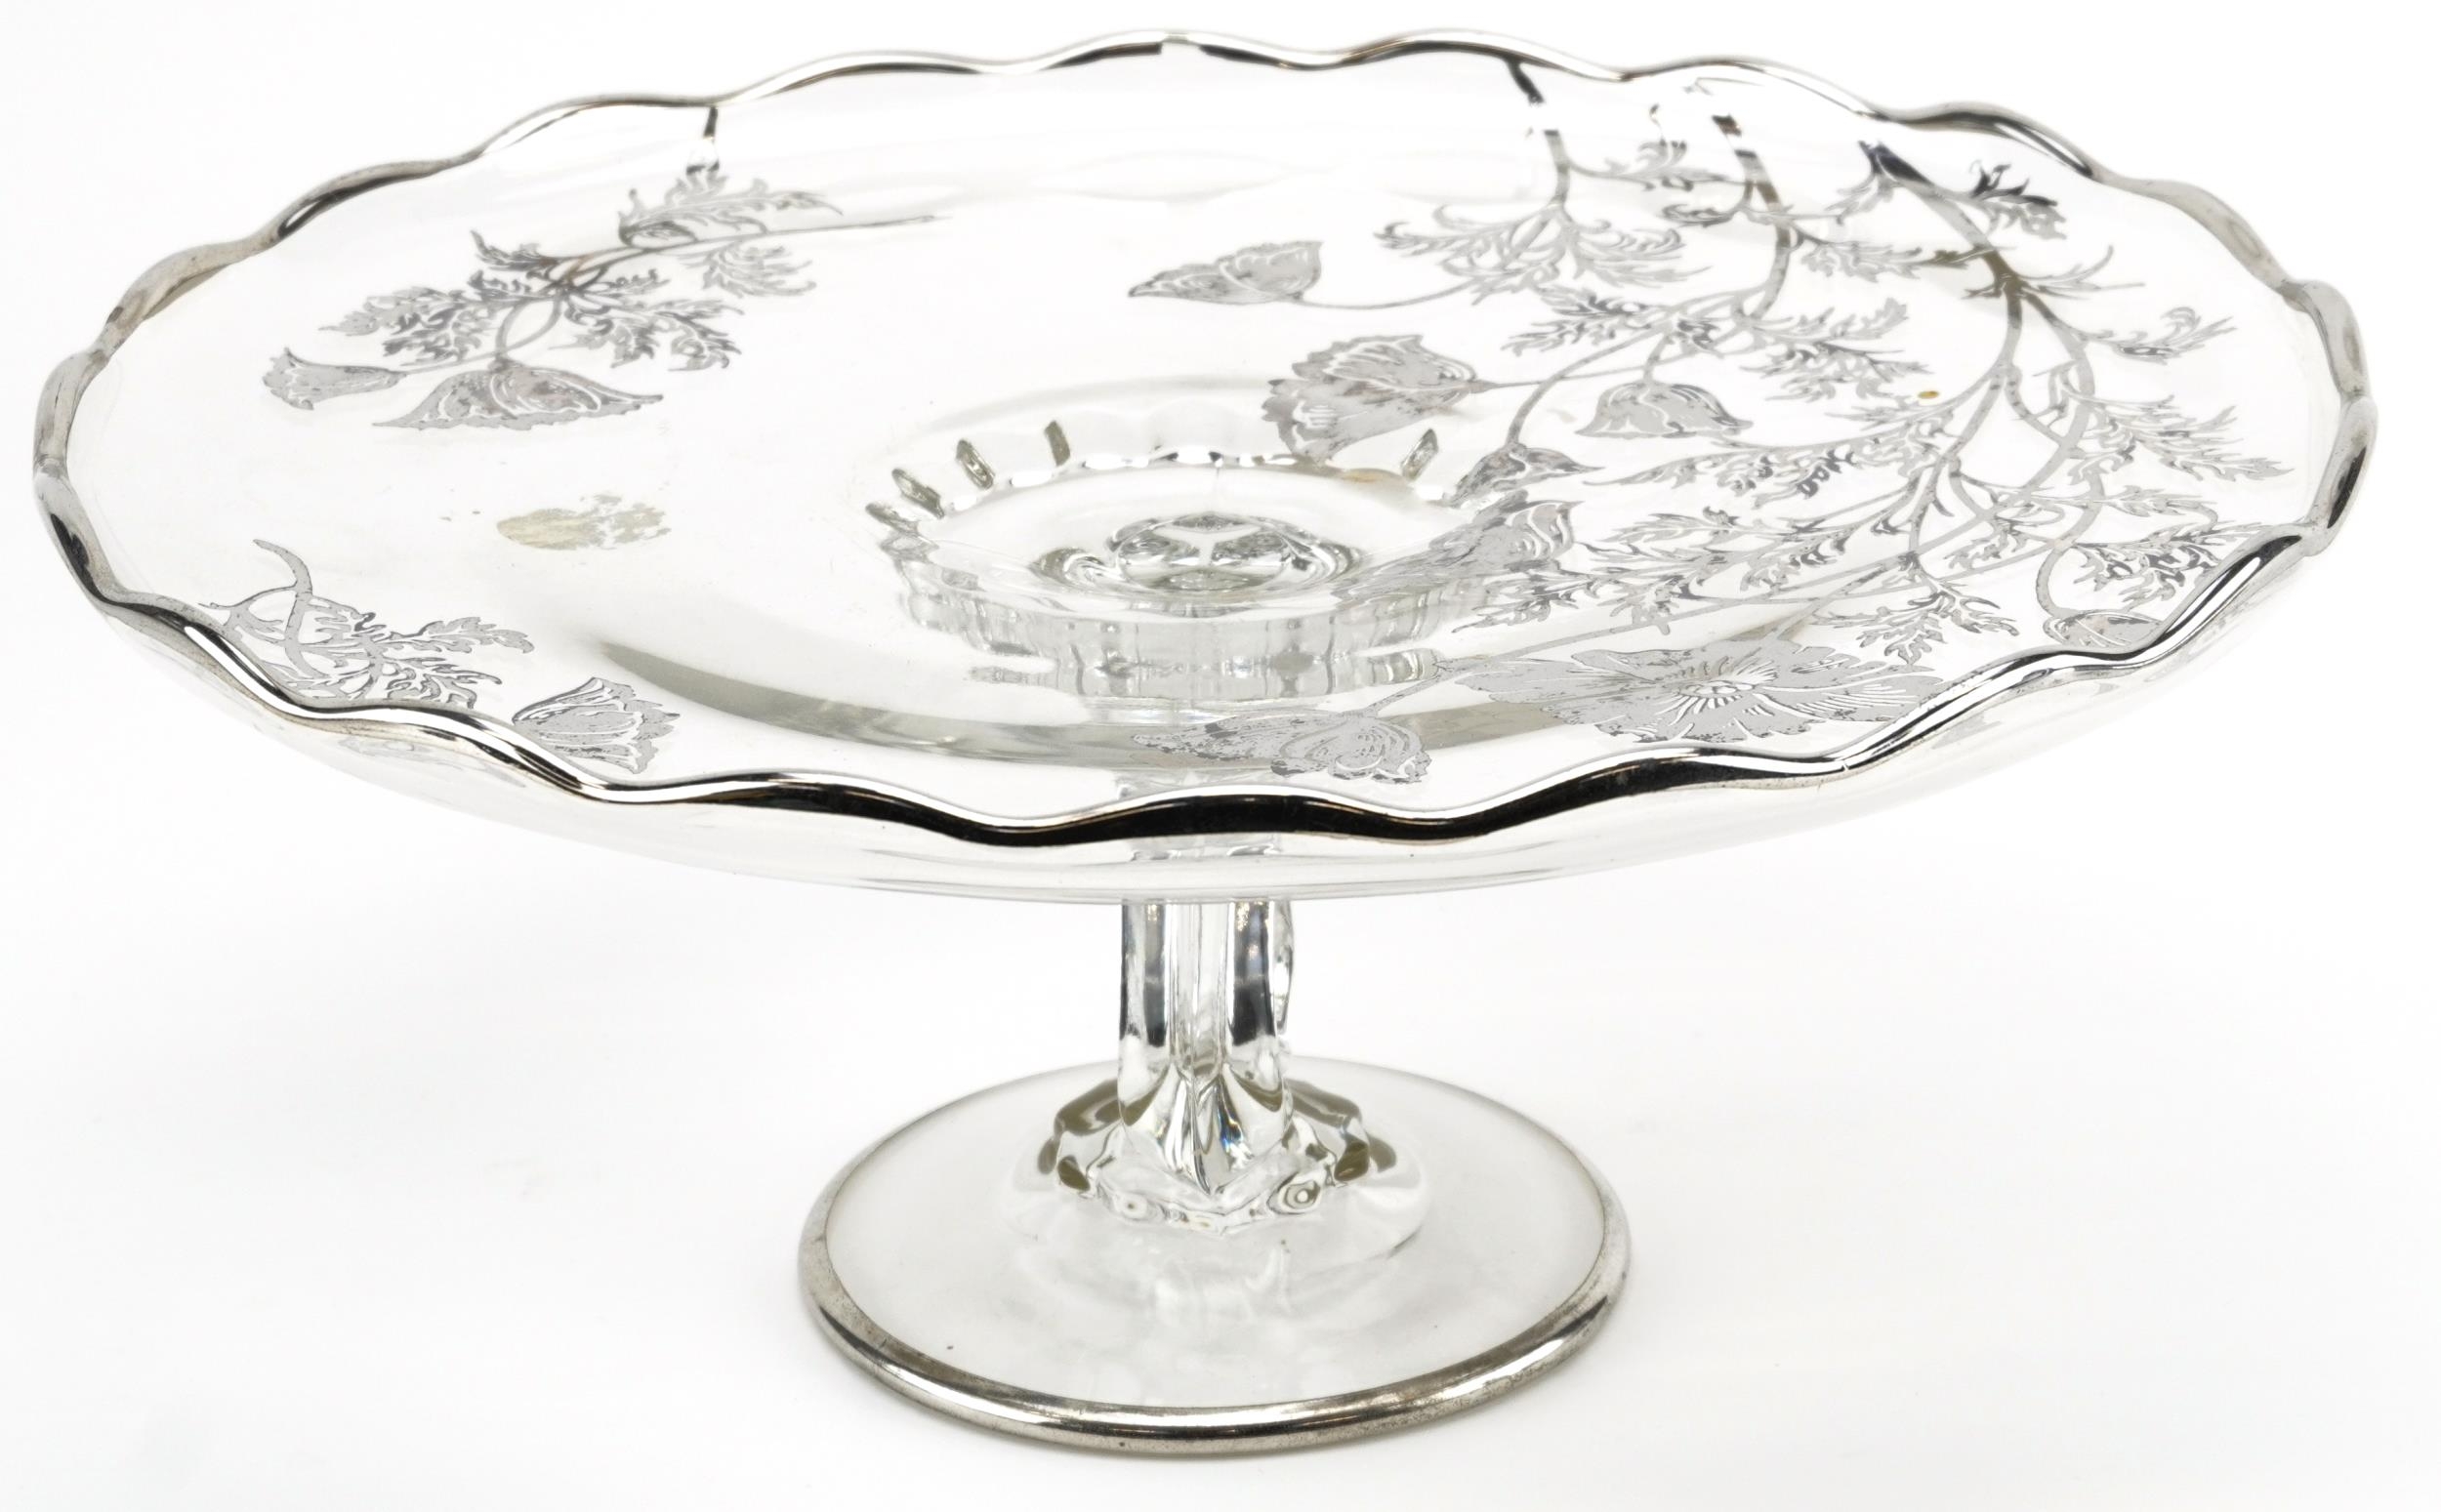 Continental silver overlaid pedestal glass tazza, 13.5cm high x 29.5cm in diameter - Image 2 of 3